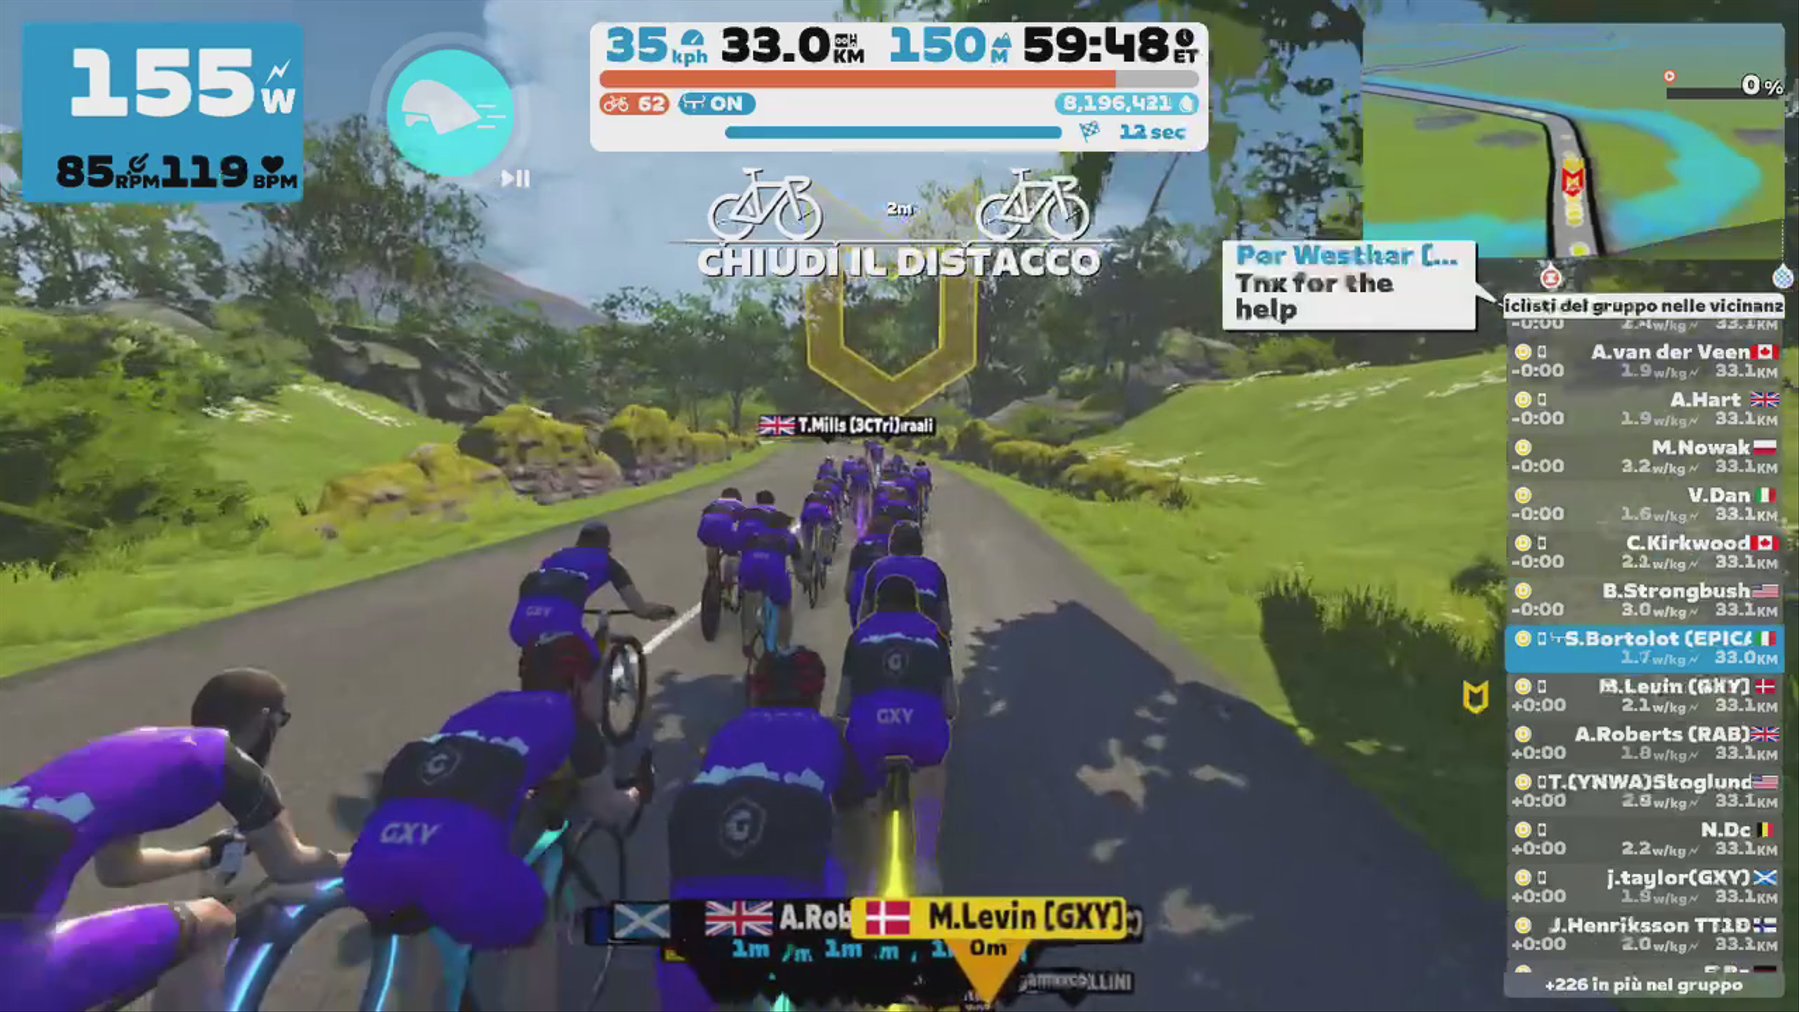 Zwift - Group Ride: GXY LOW LOOSEY GOOSEY [1.4-1.8 WKG] CAT D (D) on R.G.V. in France